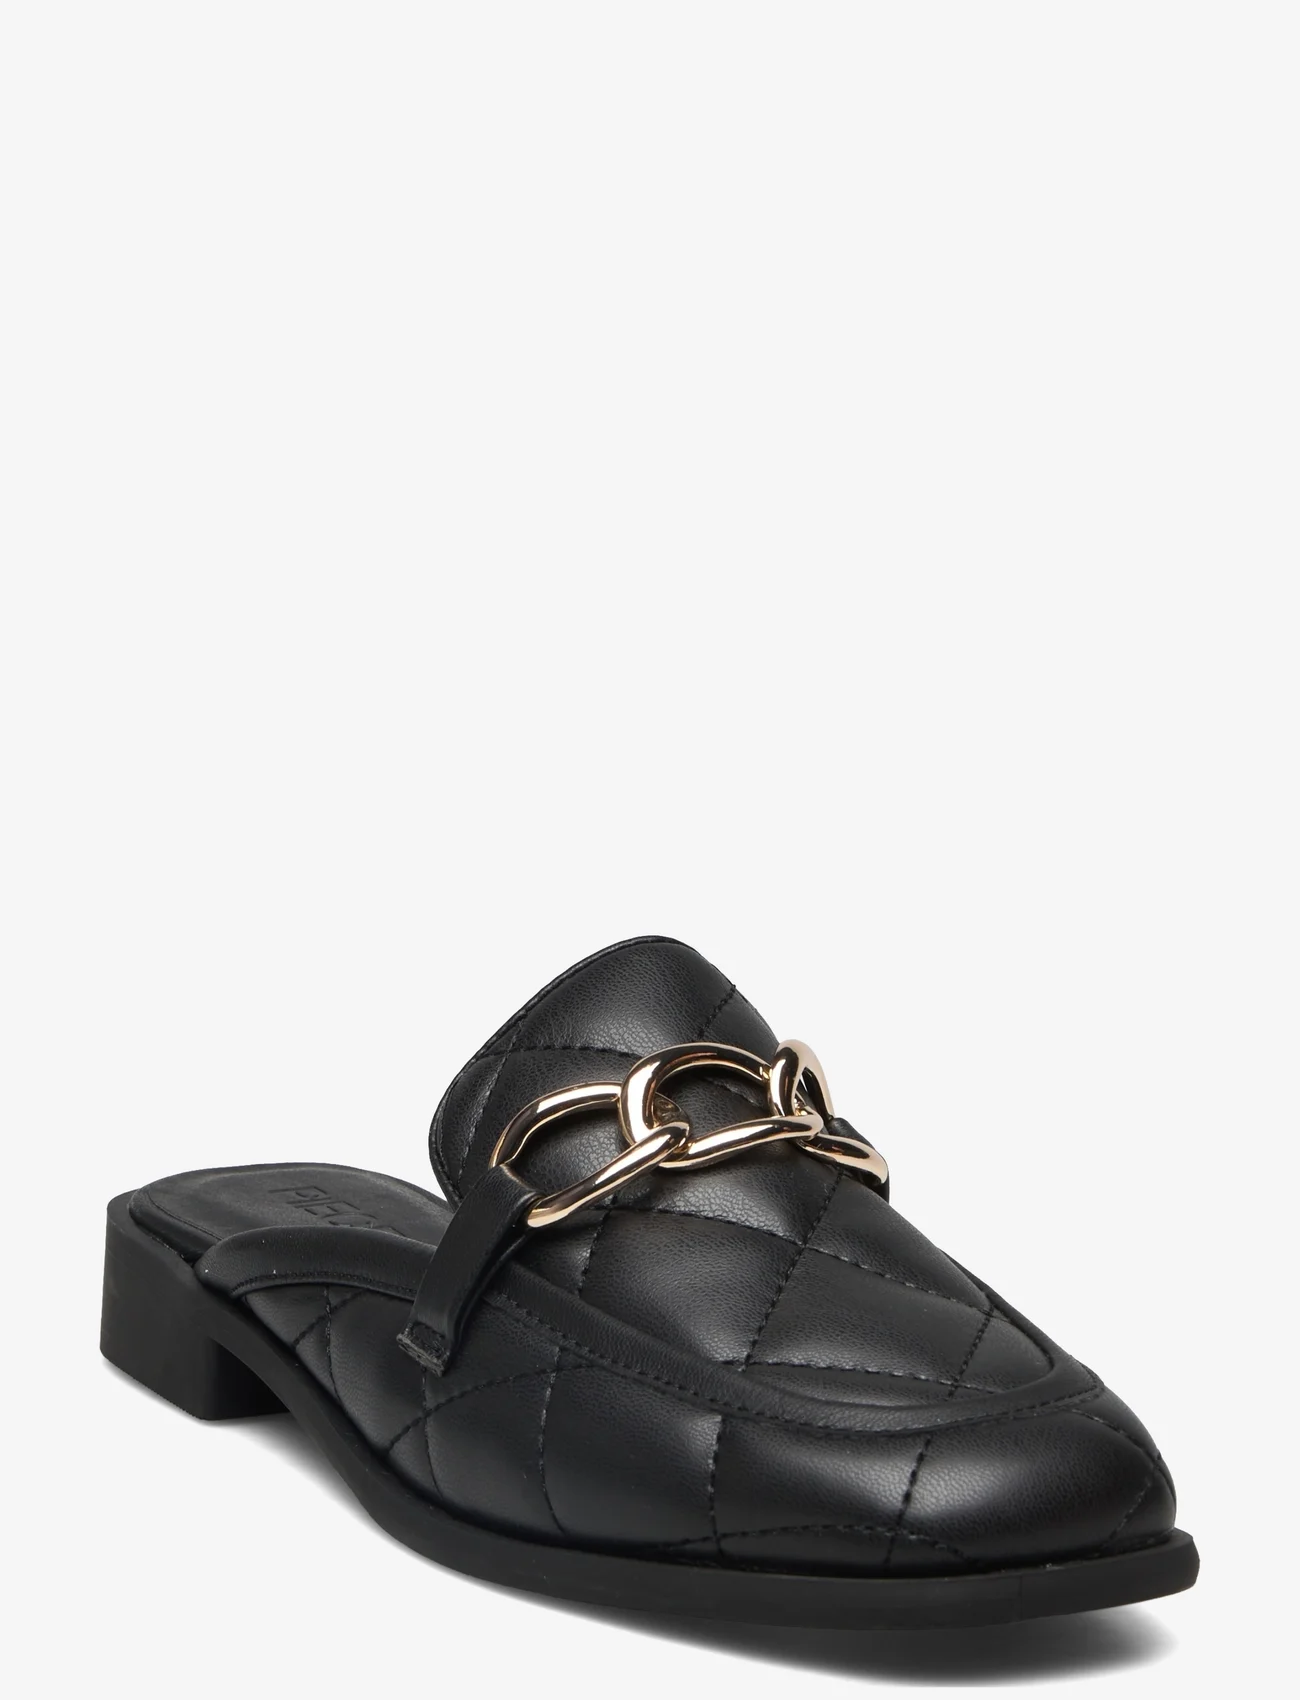 Pieces - PCSINNER CHAIN LOAFER - plakanās mules tipa kurpes - black - 0